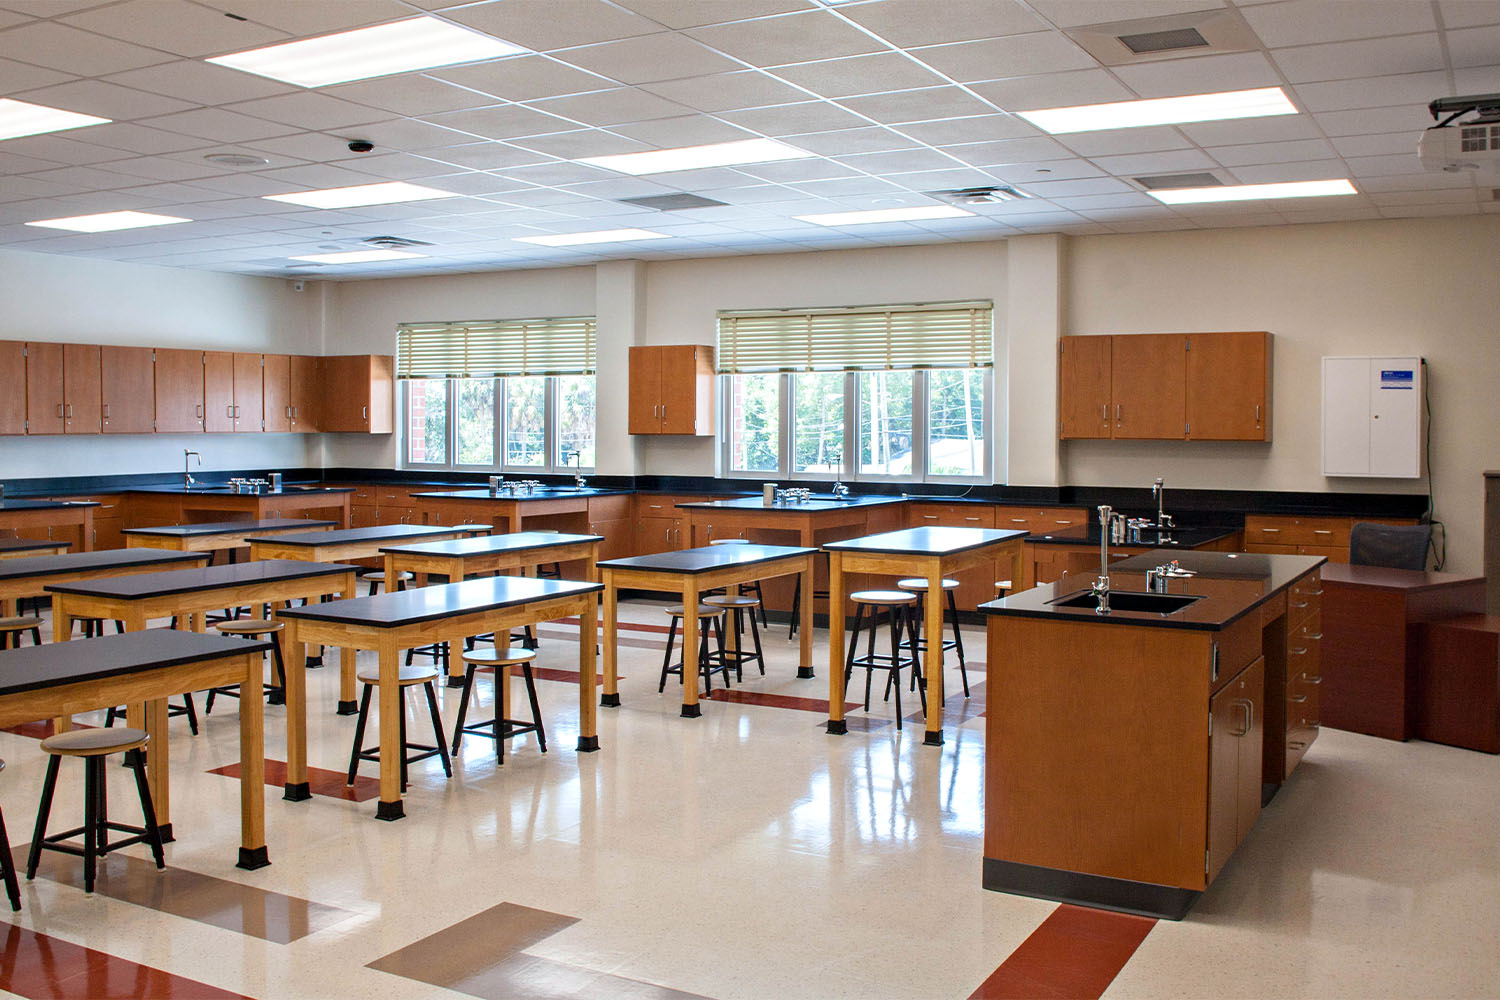 New science lab with desks, wall storage and lab equipment